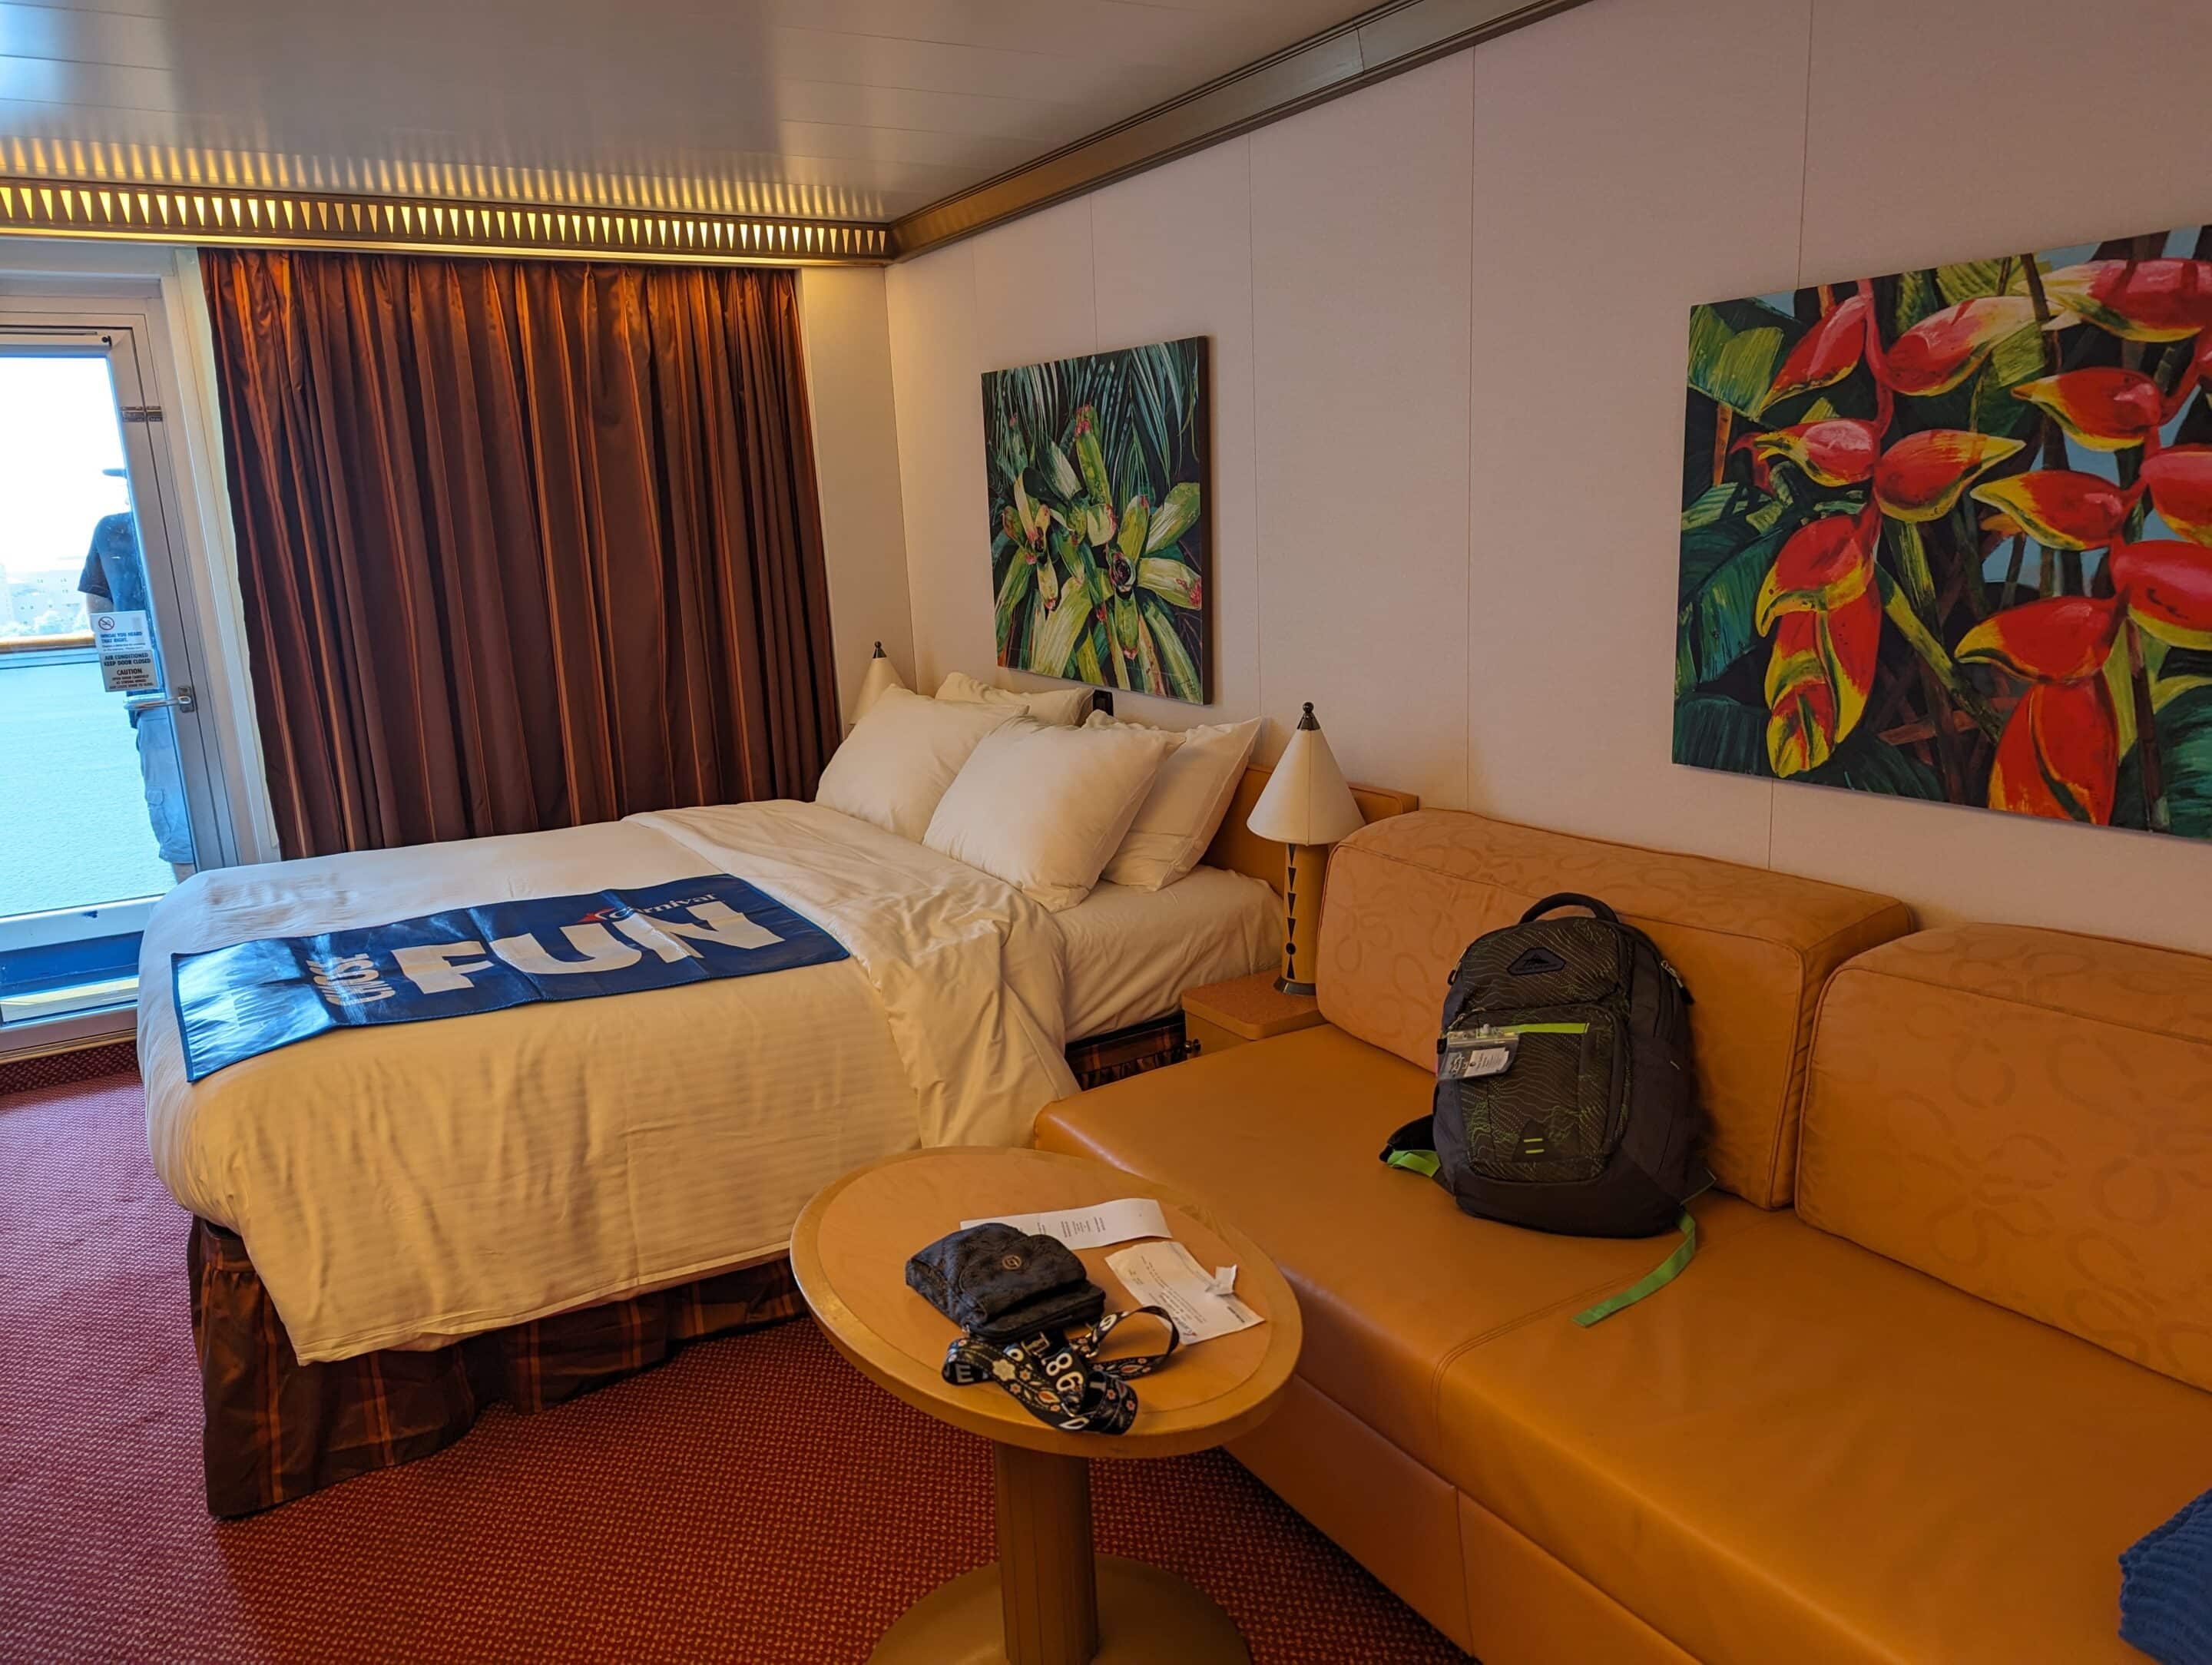 A Carnival Cruise balcony stateroom on Carnival magic shows bed, couch, and the large balcony window room 8435. Even in your stateroom you should be thinking of your cruise safety.